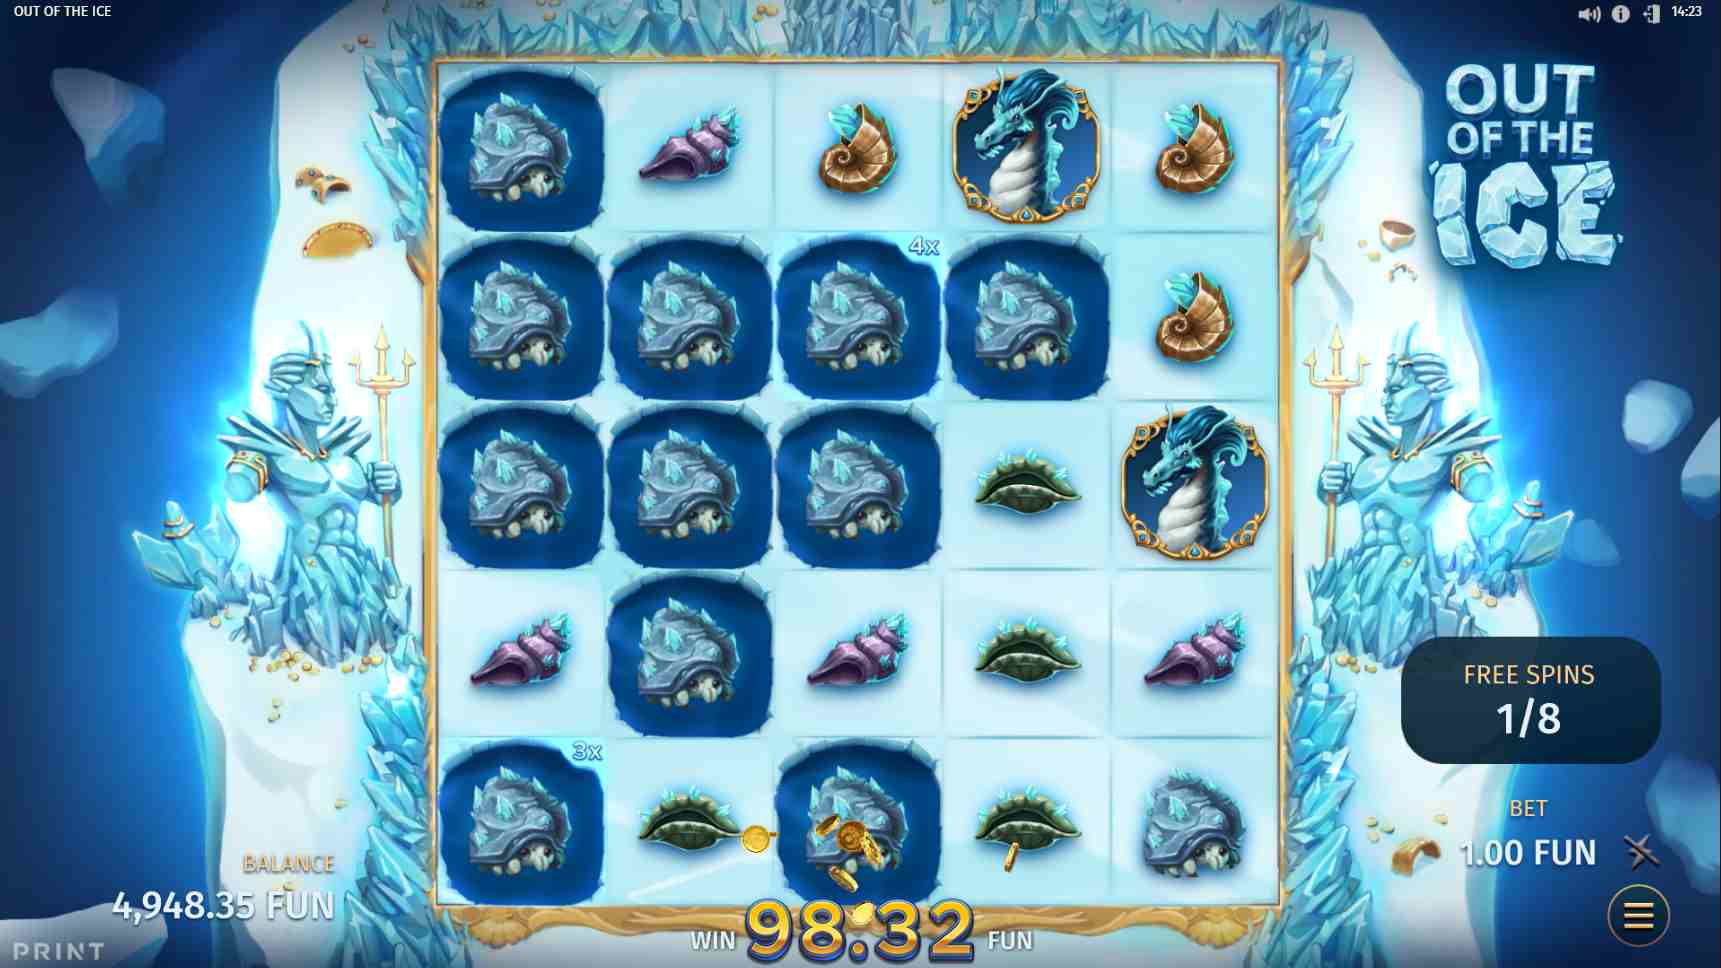 Out of the Ice Free Spins